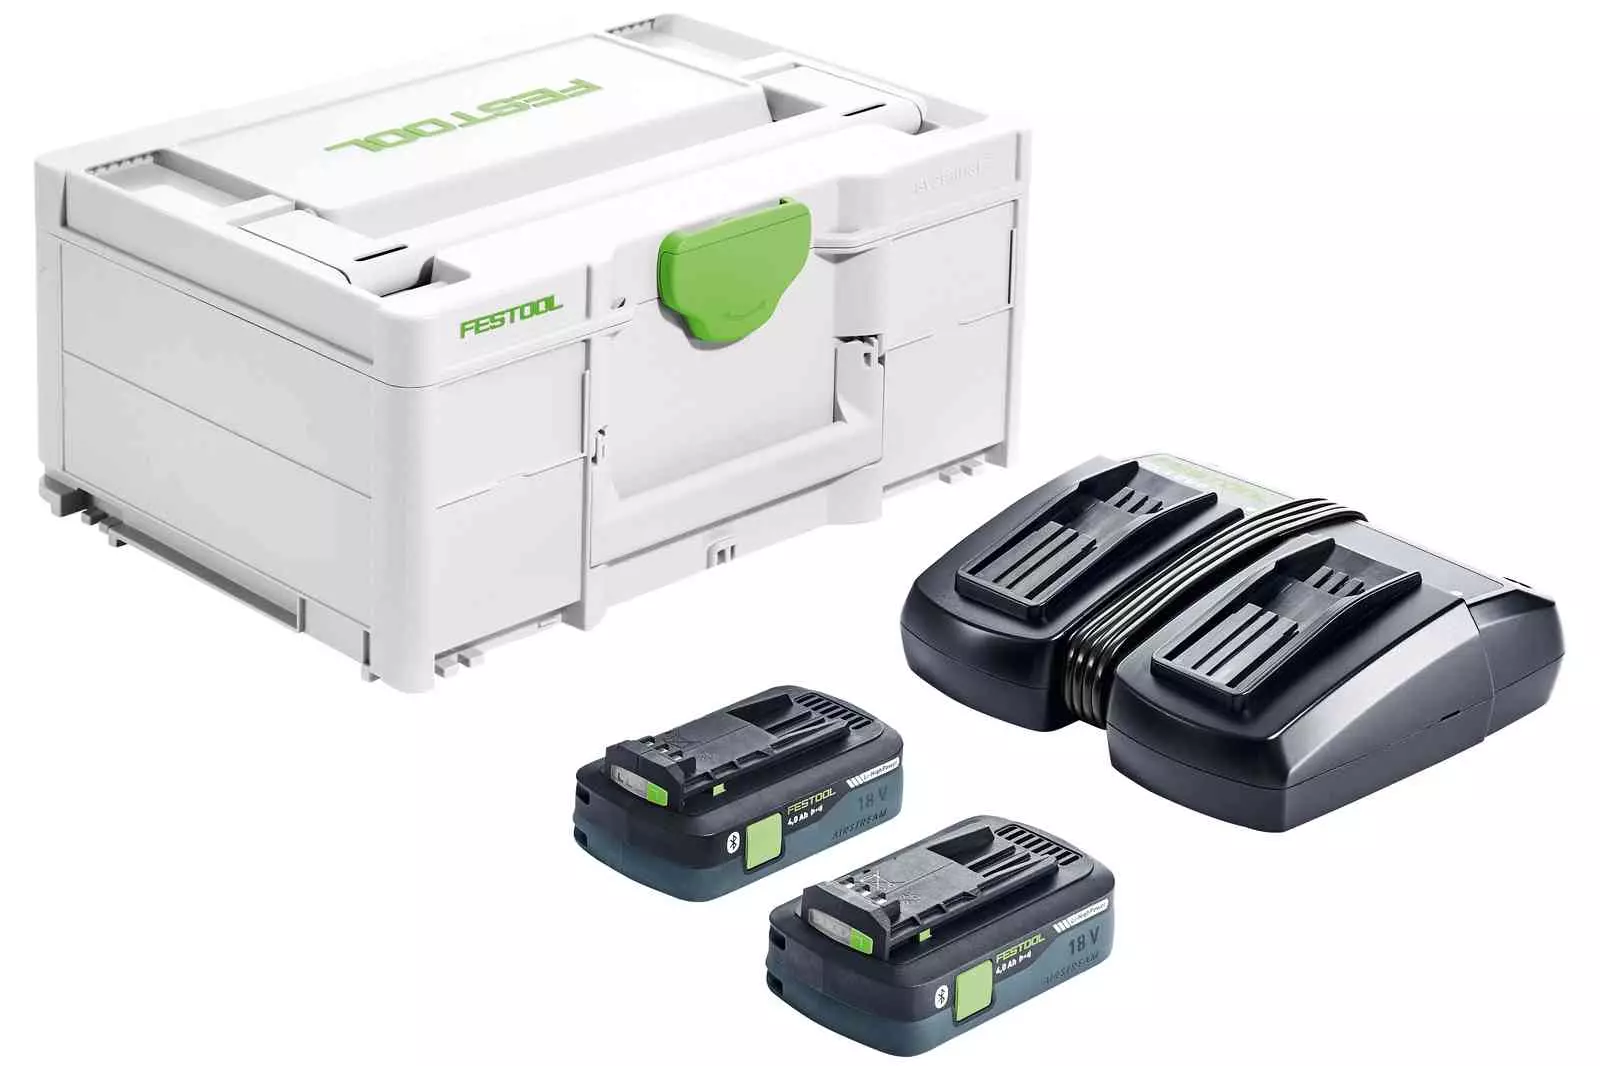 Set Énergie SYS 18V 2x4.0/TCL 6 Duo - FESTOOL - chargeur double - Systainer - 577109